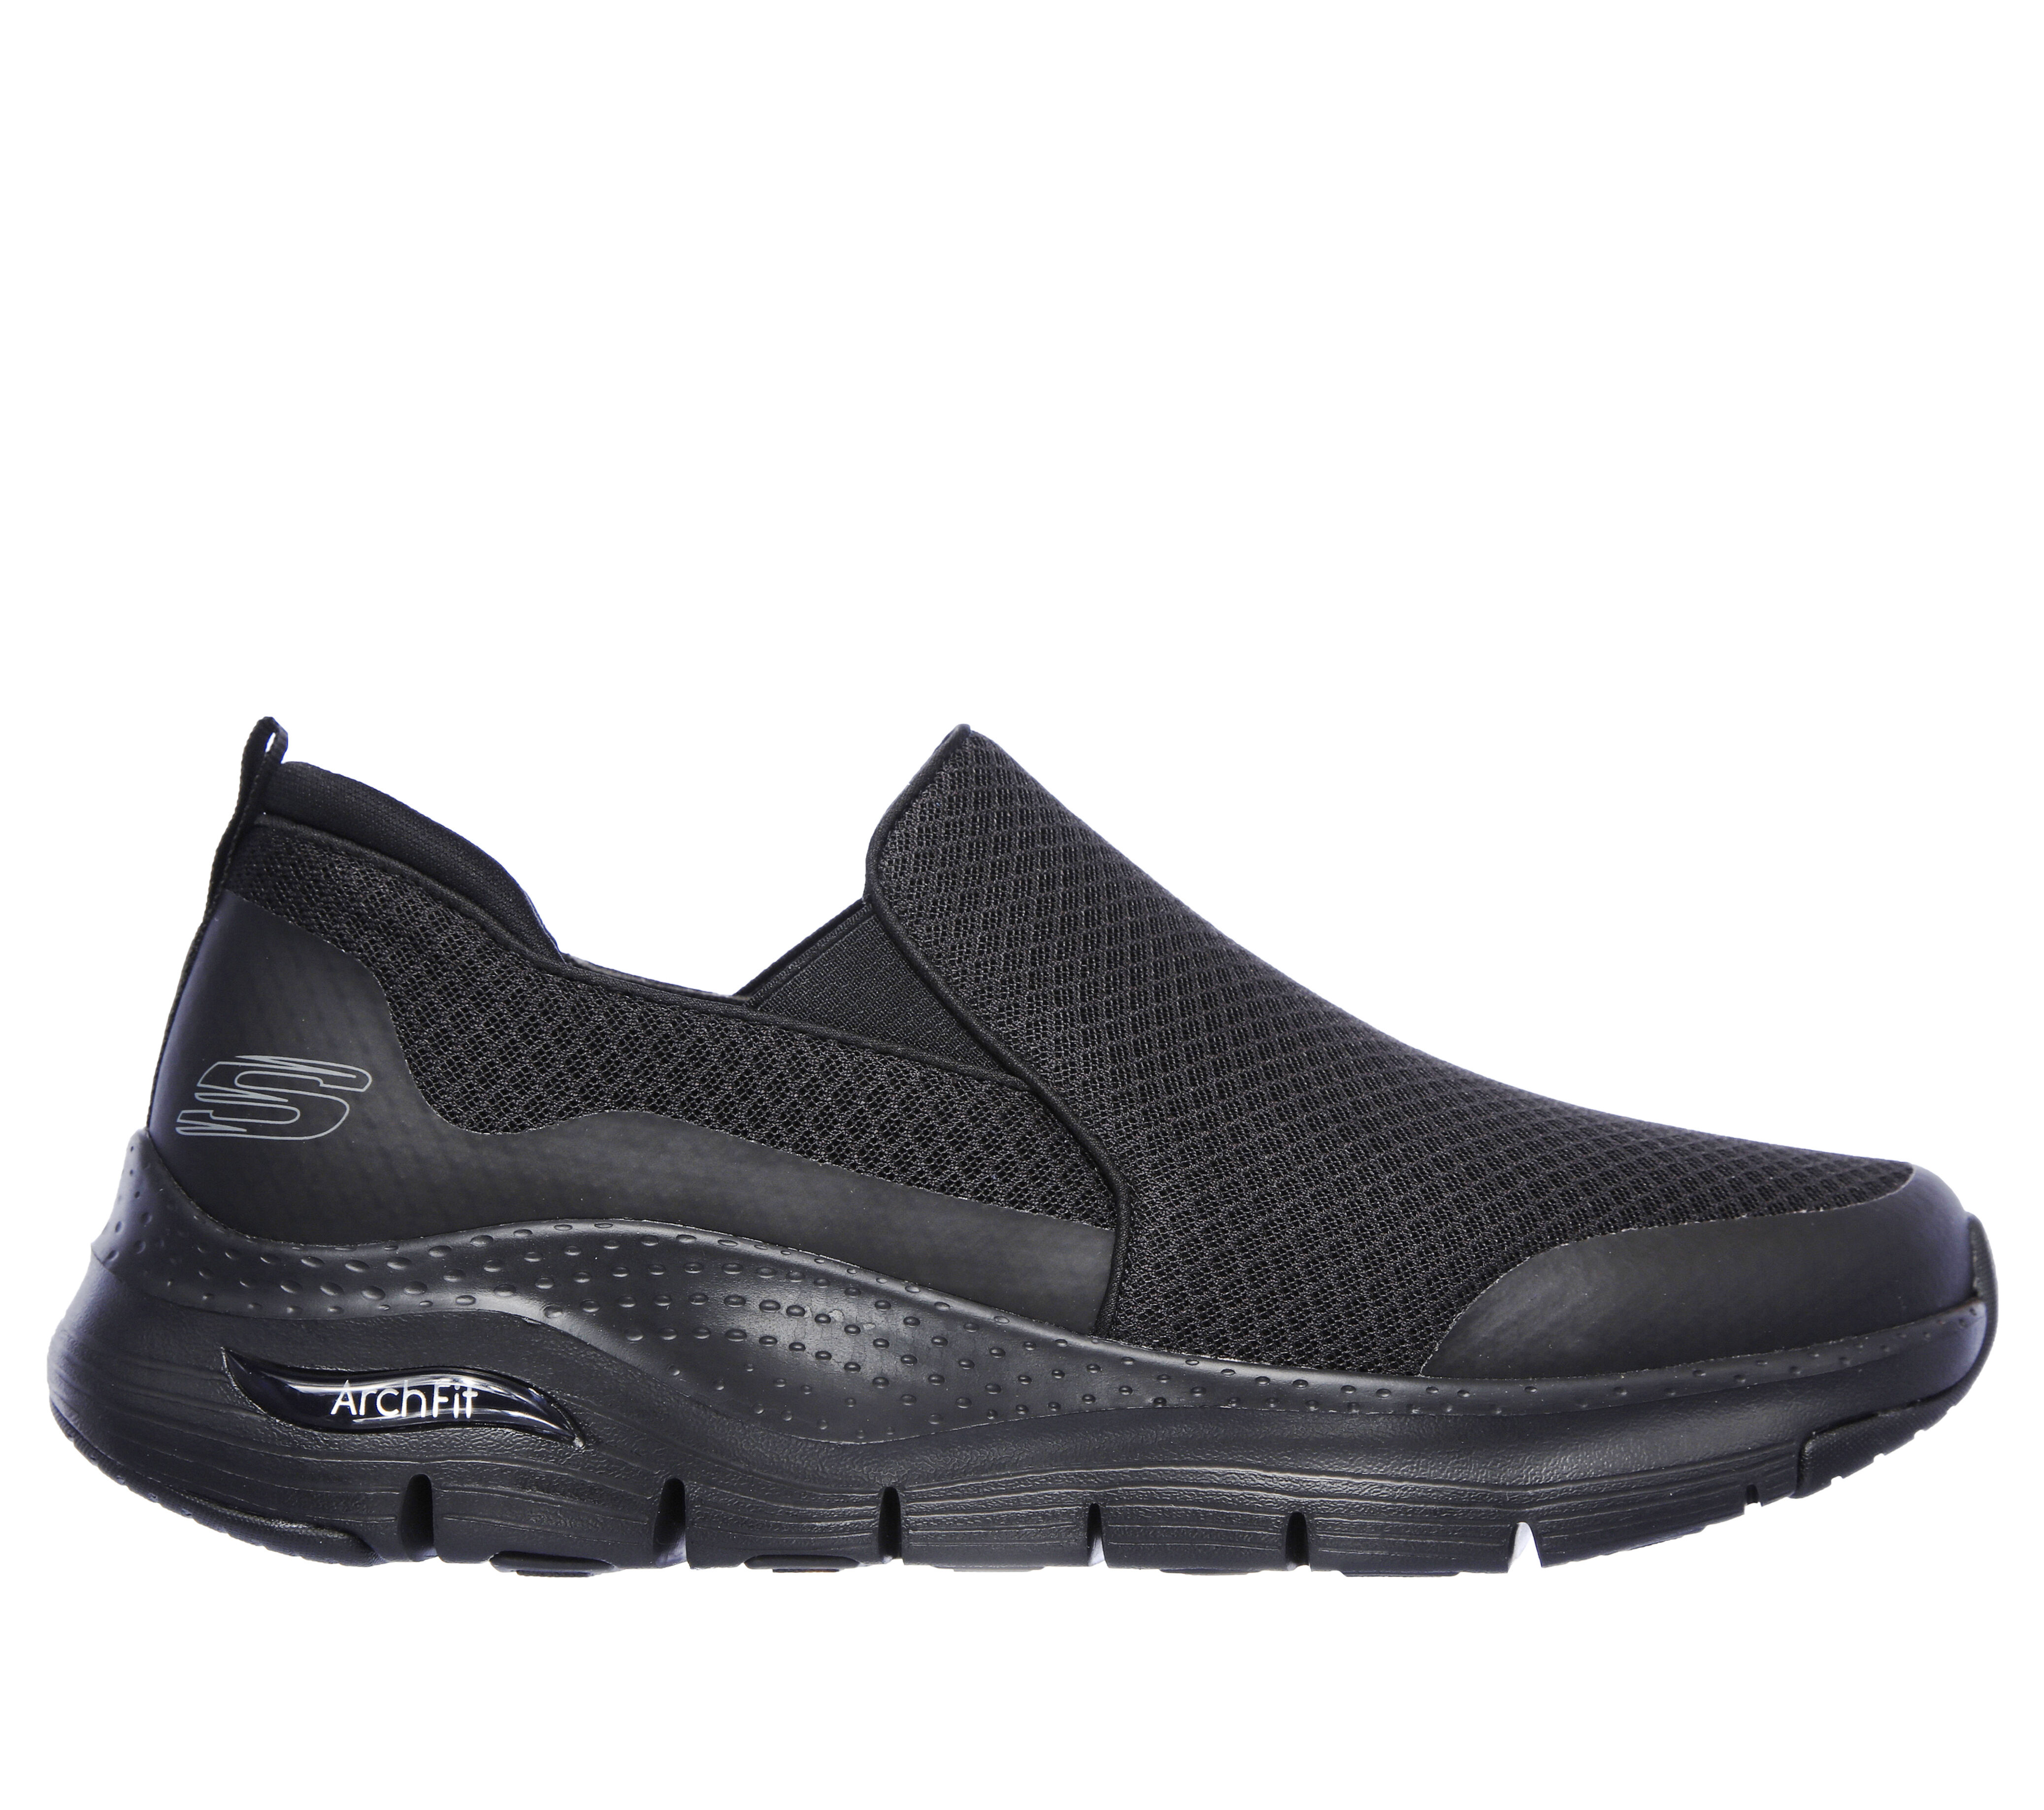 skechers relaxed fit sport mens